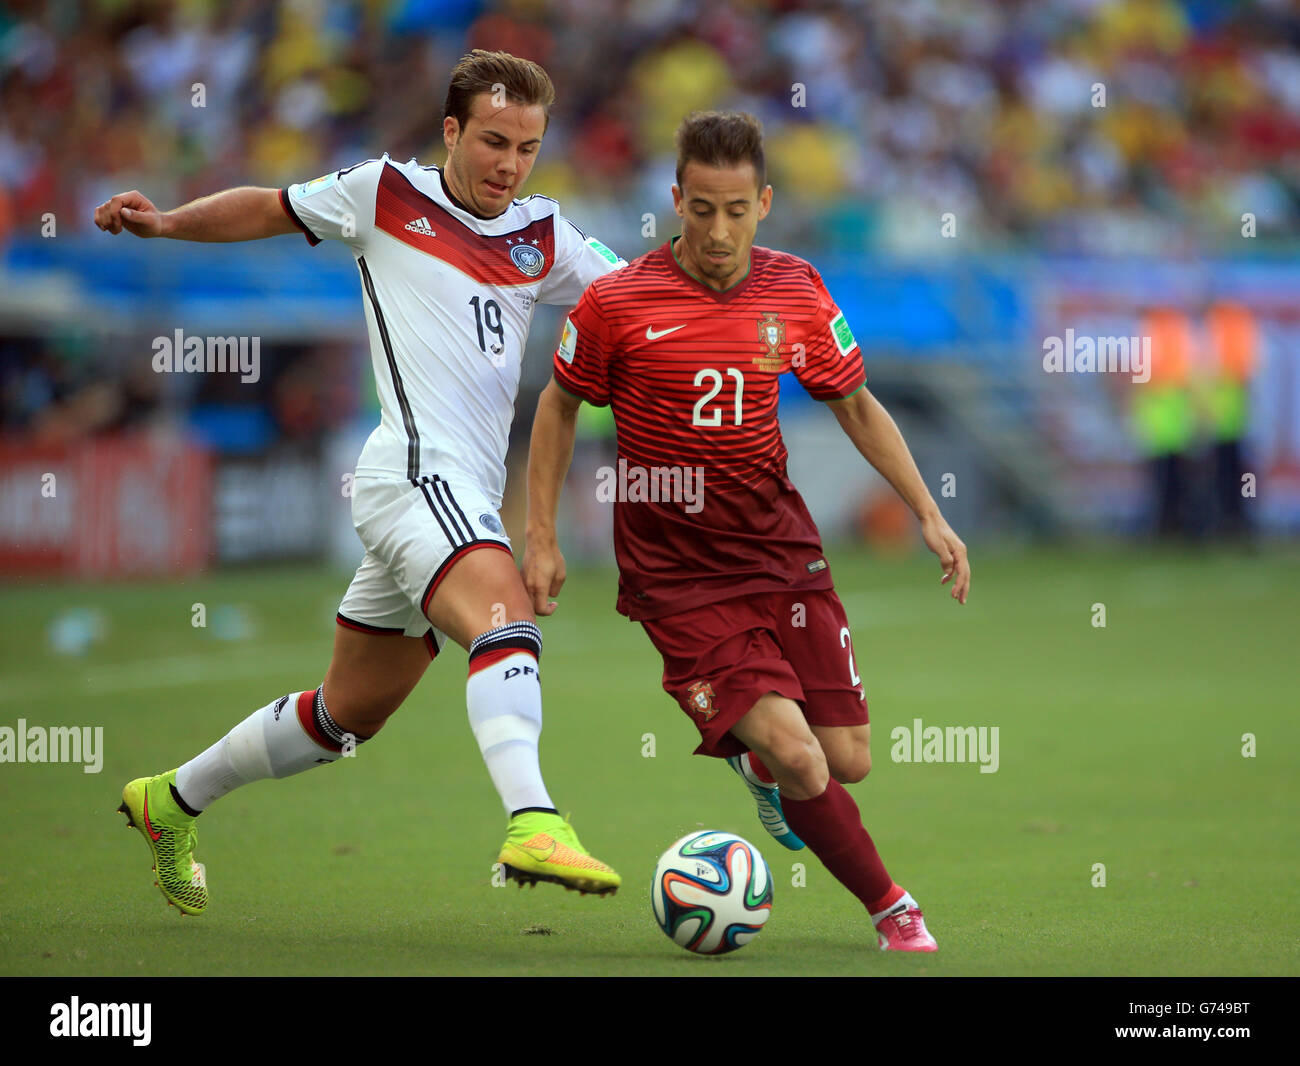 Soccer - FIFA World Cup 2014 - Group G - Germany v Portugal - Arena Fonte Nova. Germany's Mario Gotze (left) and Portugal's Joao Pereira battle for the ball Stock Photo